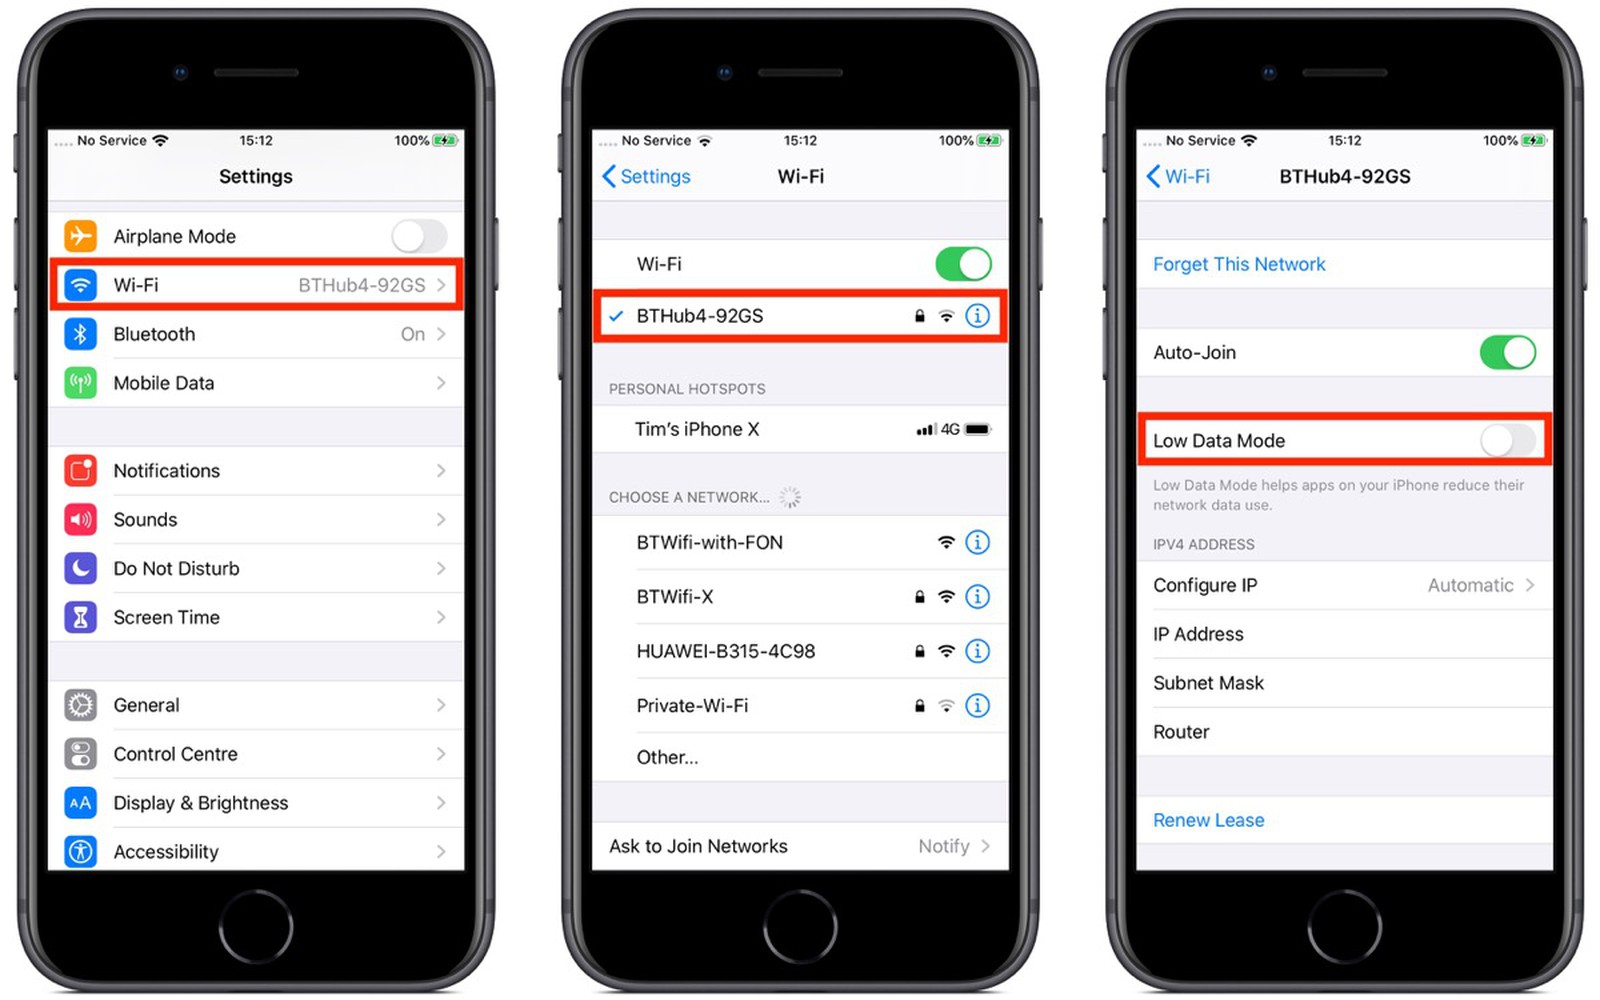 How to Reduce Your iPhone or iPad Network Data Usage With iOS 13's Low